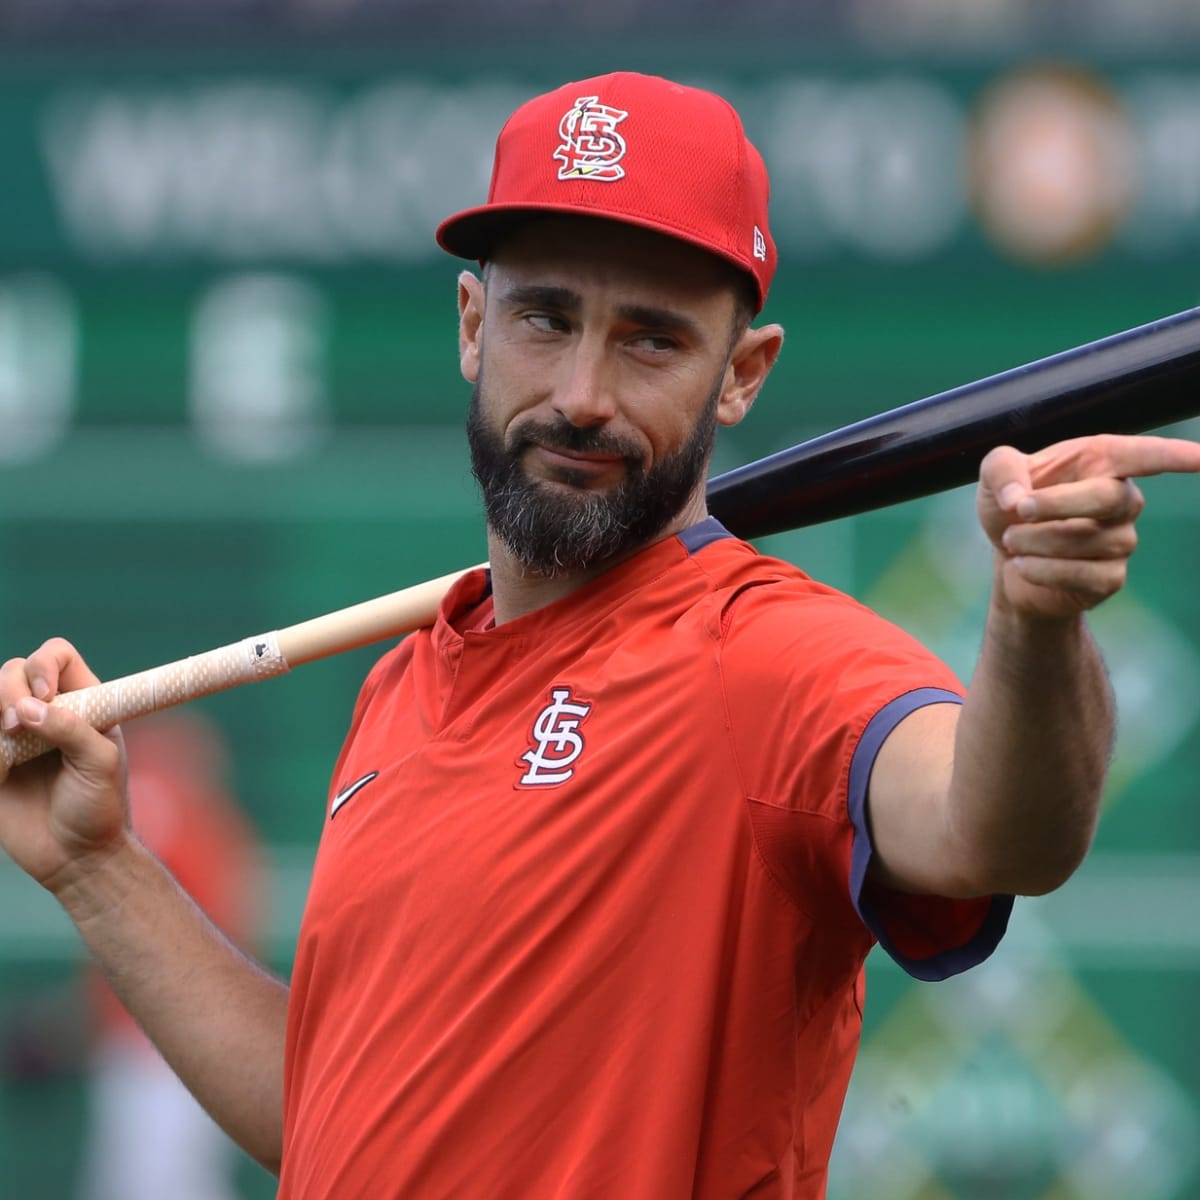 Where I Wanted To Be': Inside Matt Carpenter Decision to Join